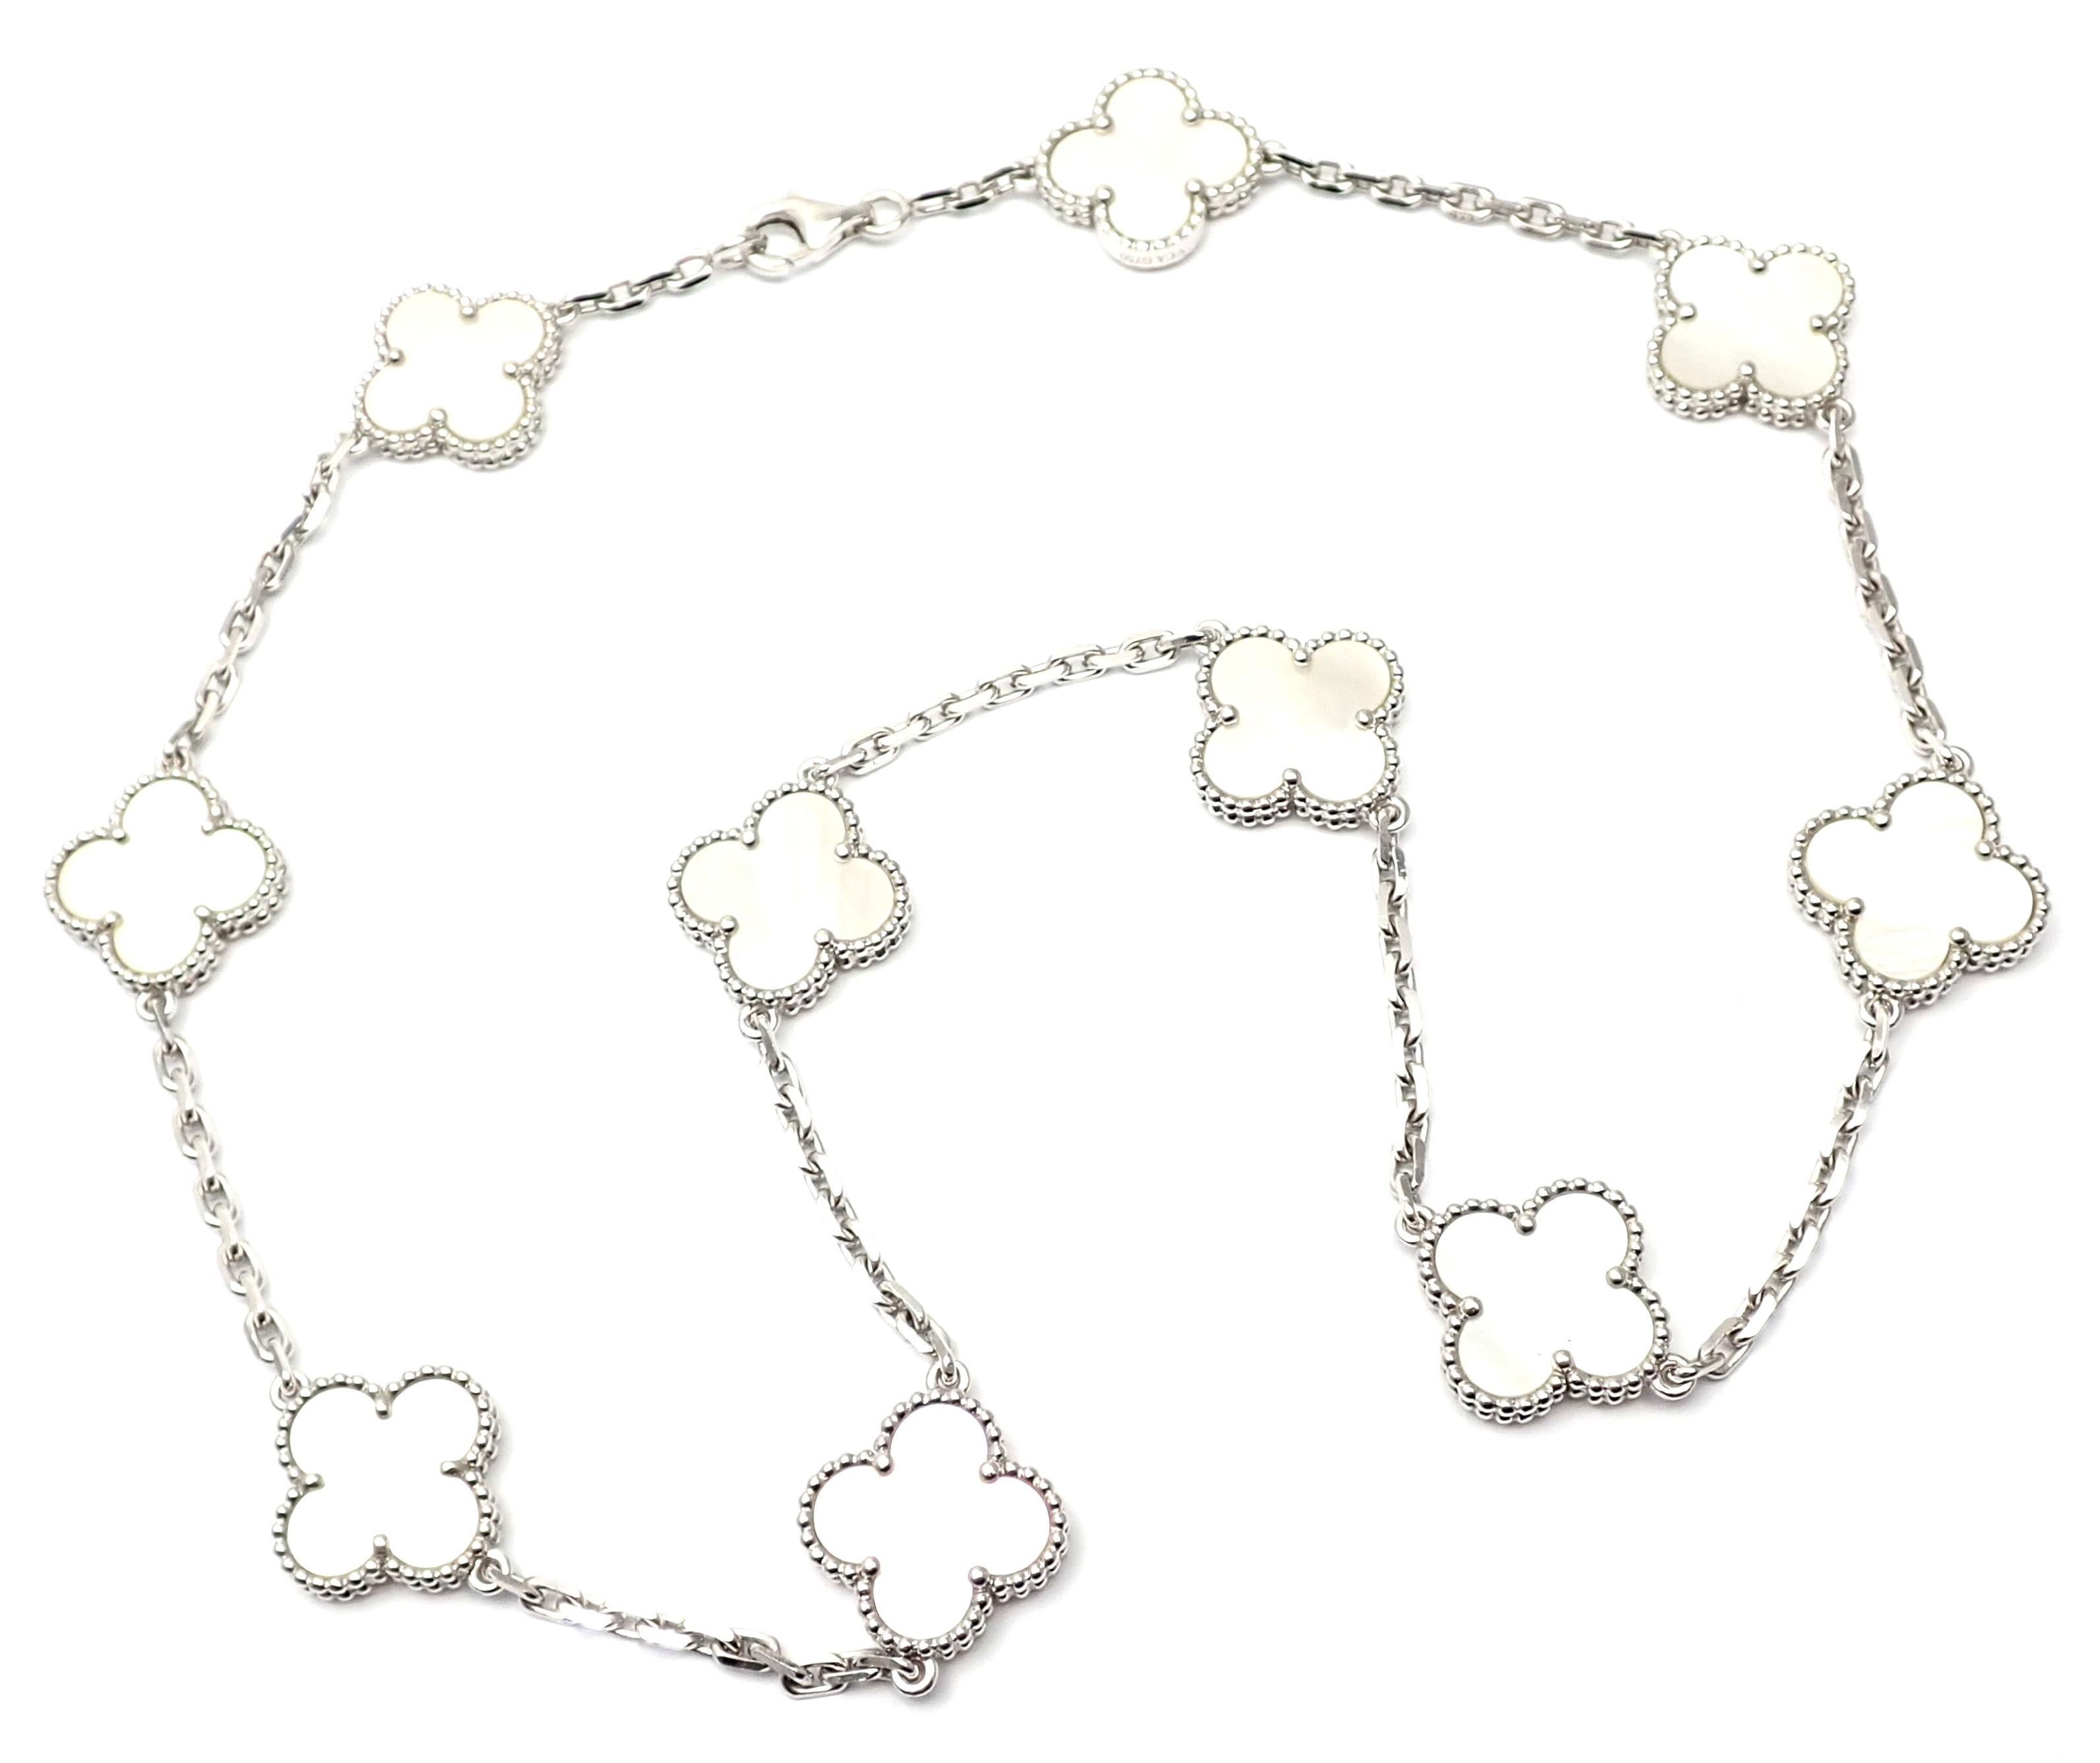 18k White Gold Alhambra 10 Motifs Mother Of Pearl Necklace by Van Cleef & Arpels. 
With 10 motifs of mother of pearl Alhambra stones 15mm each.  
**** This necklace comes with Van Cleef & Arpels certificate of authenticity.
Details: 
Length: 16.8